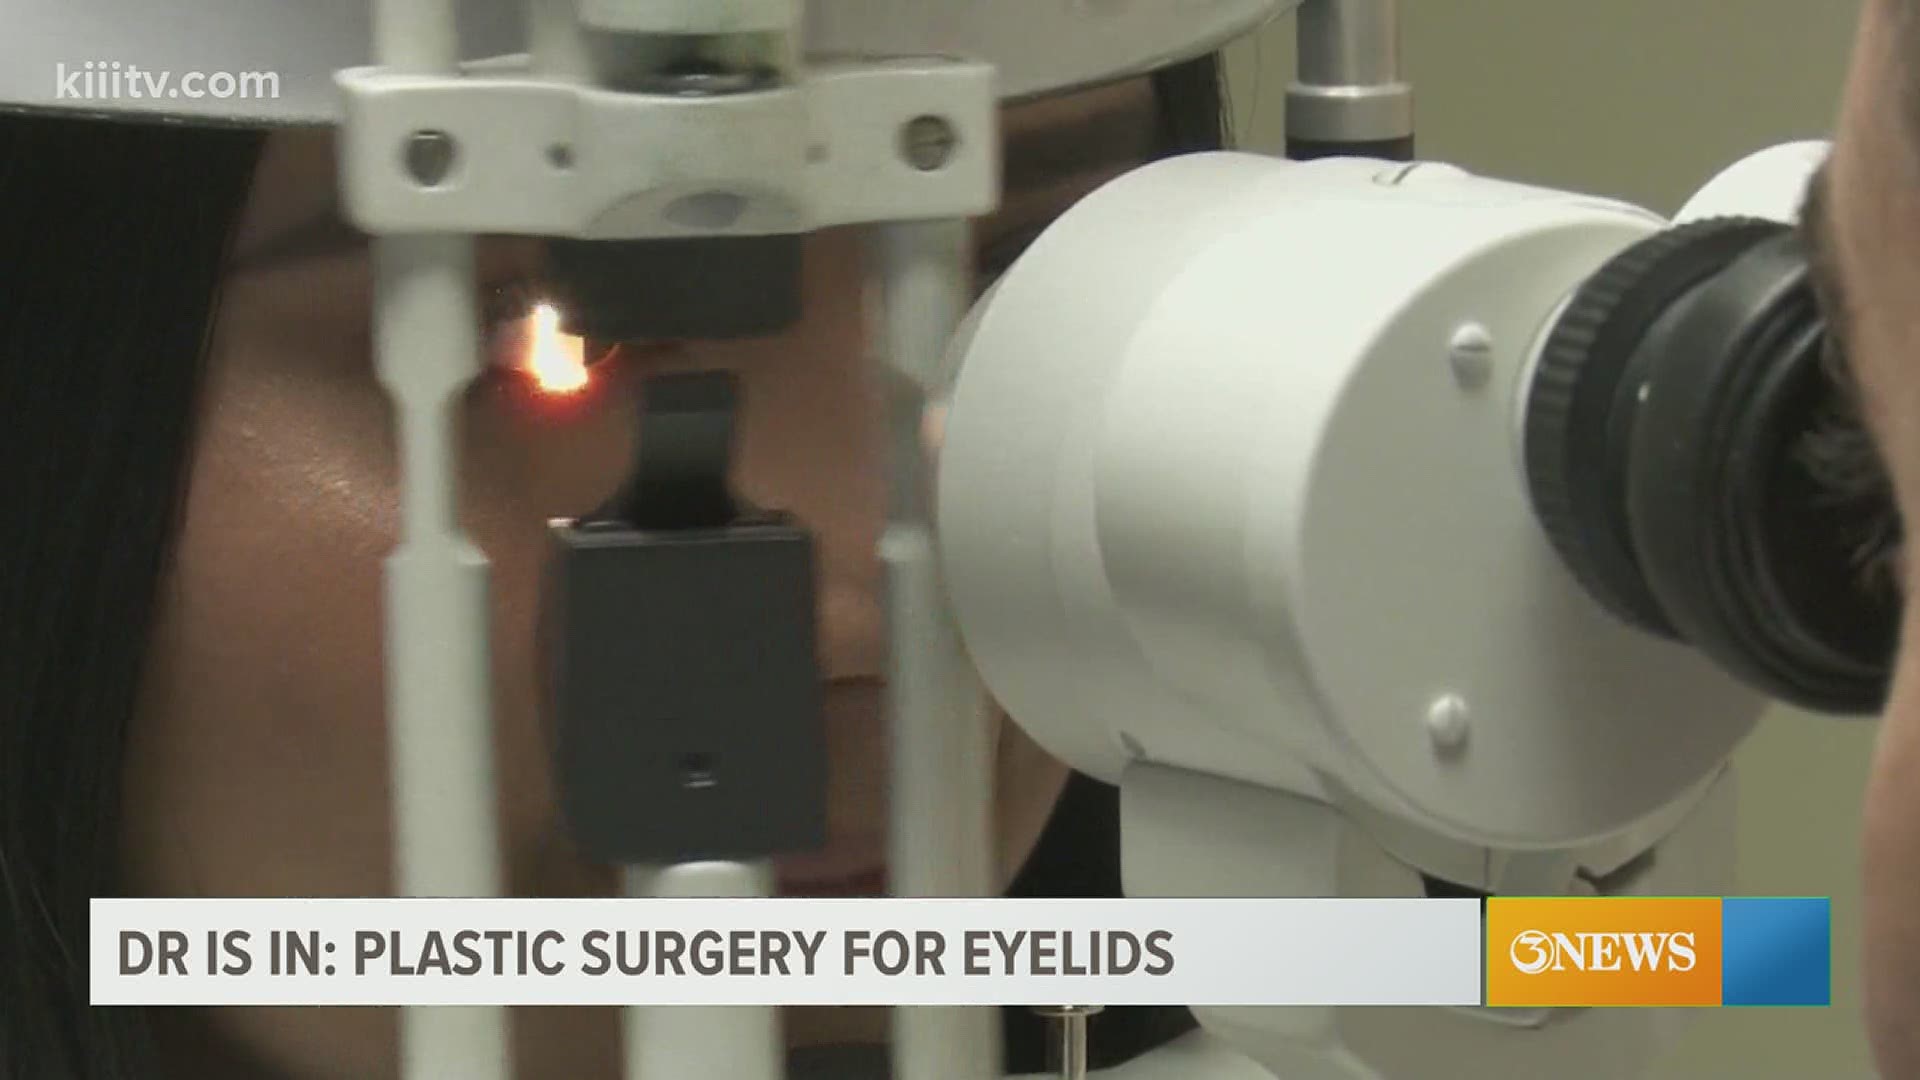 Eye lid surgery can improve field of vision for many